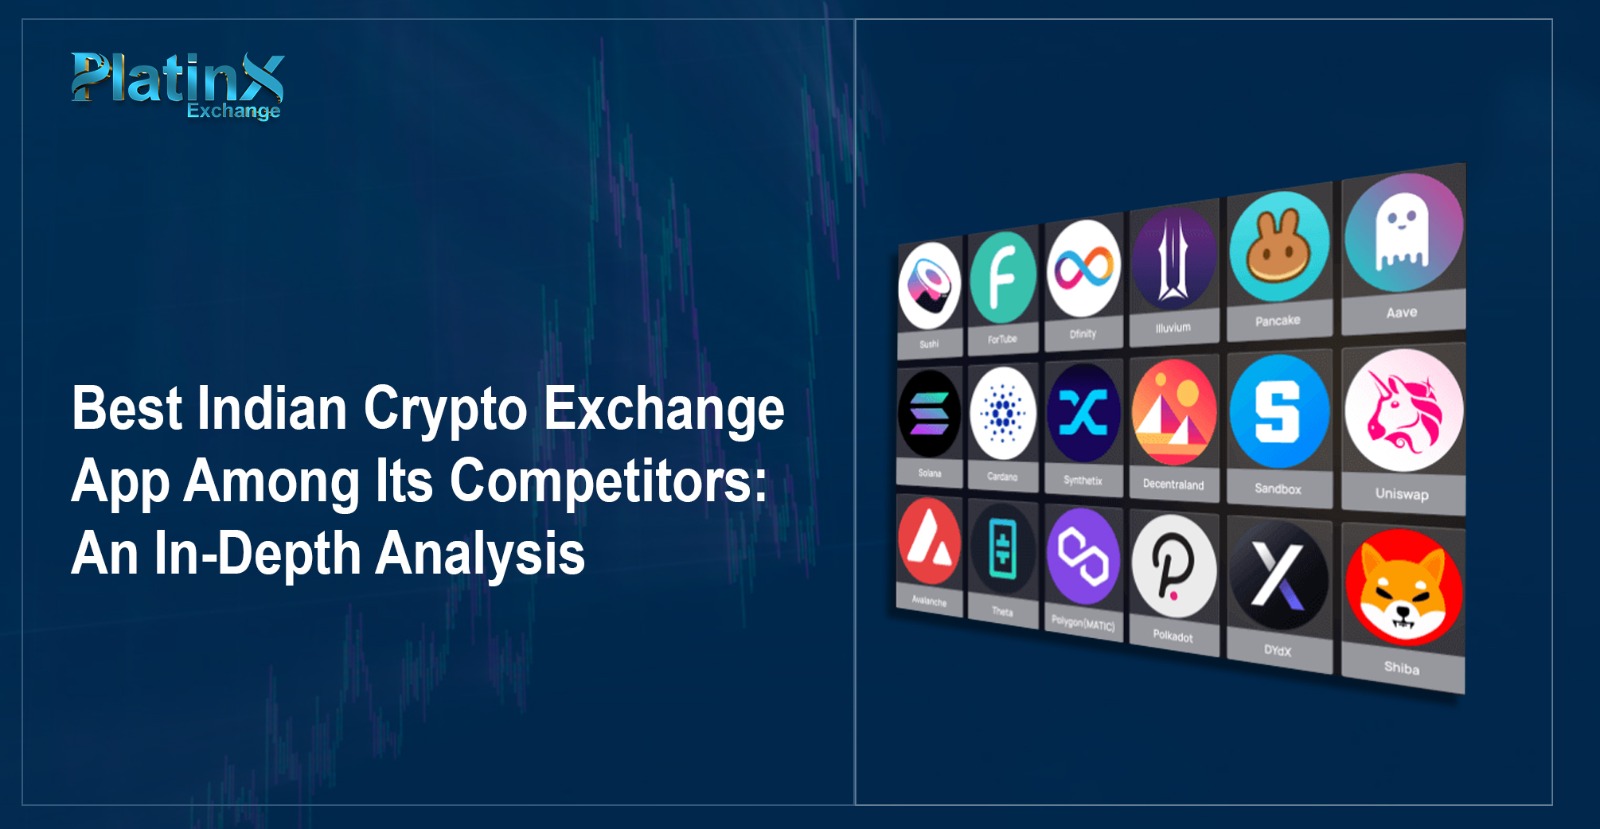 Best Indian Crypto Exchange App Among Its Competitors: An In-Depth Analysis